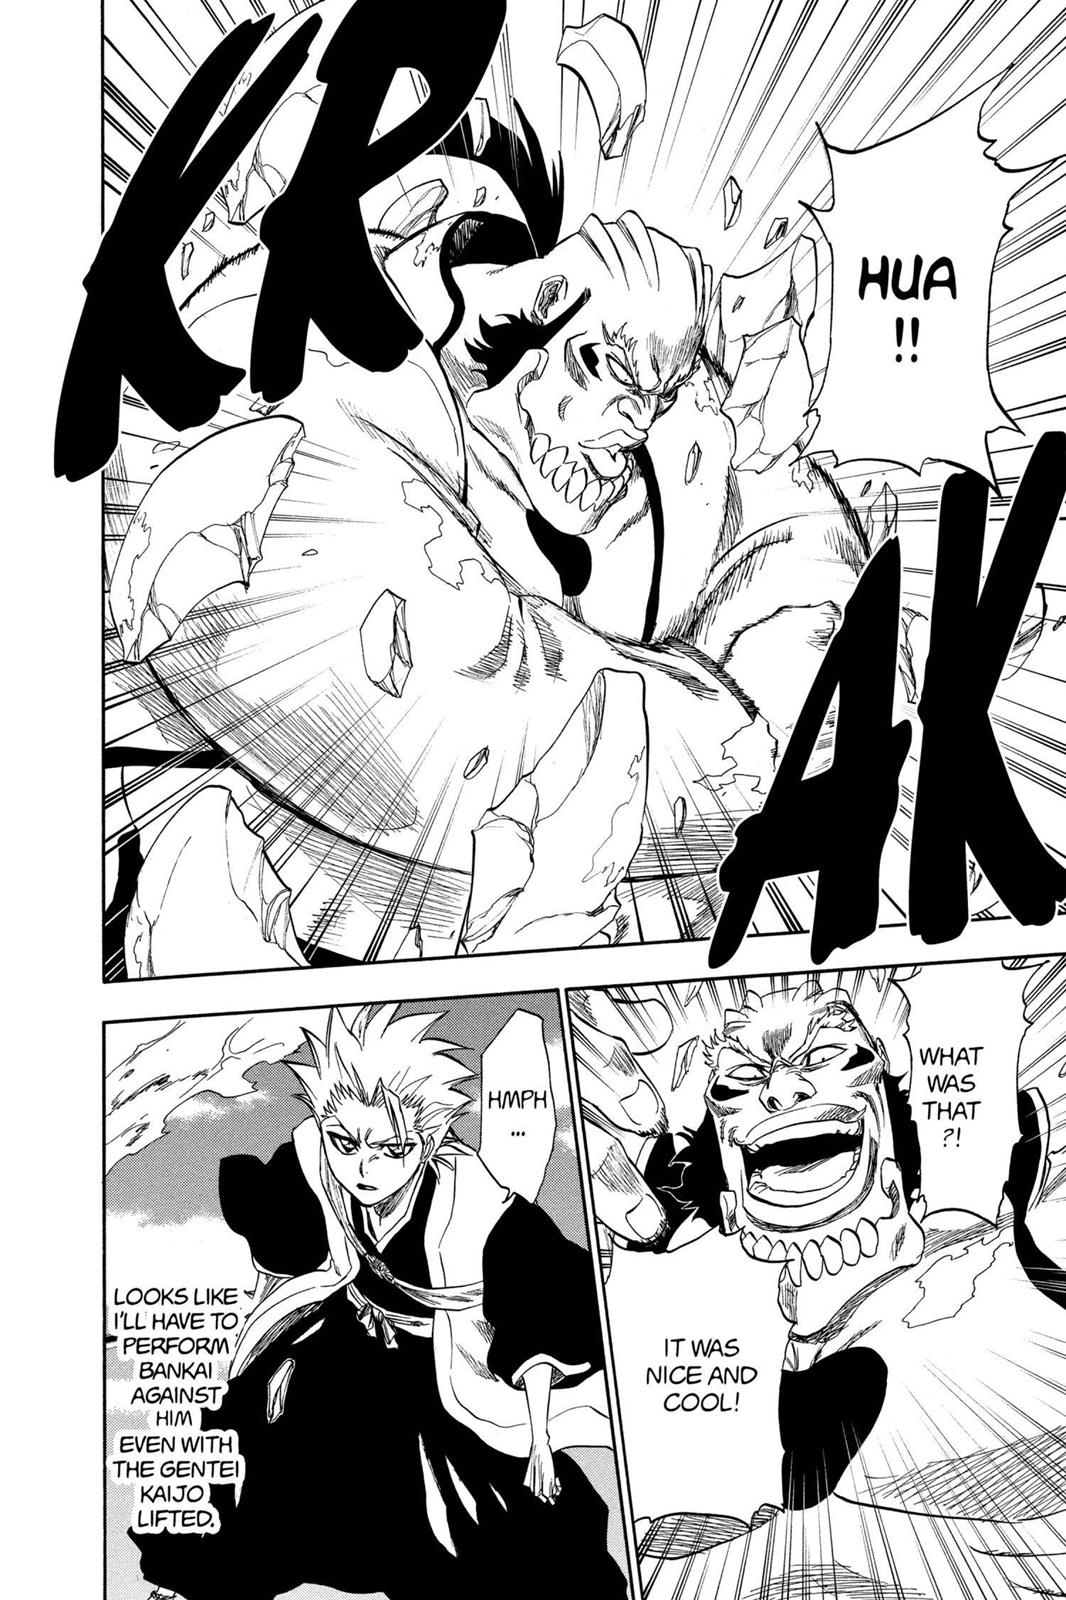 MangaThrill - Captain Yamamoto is in action as Bleach